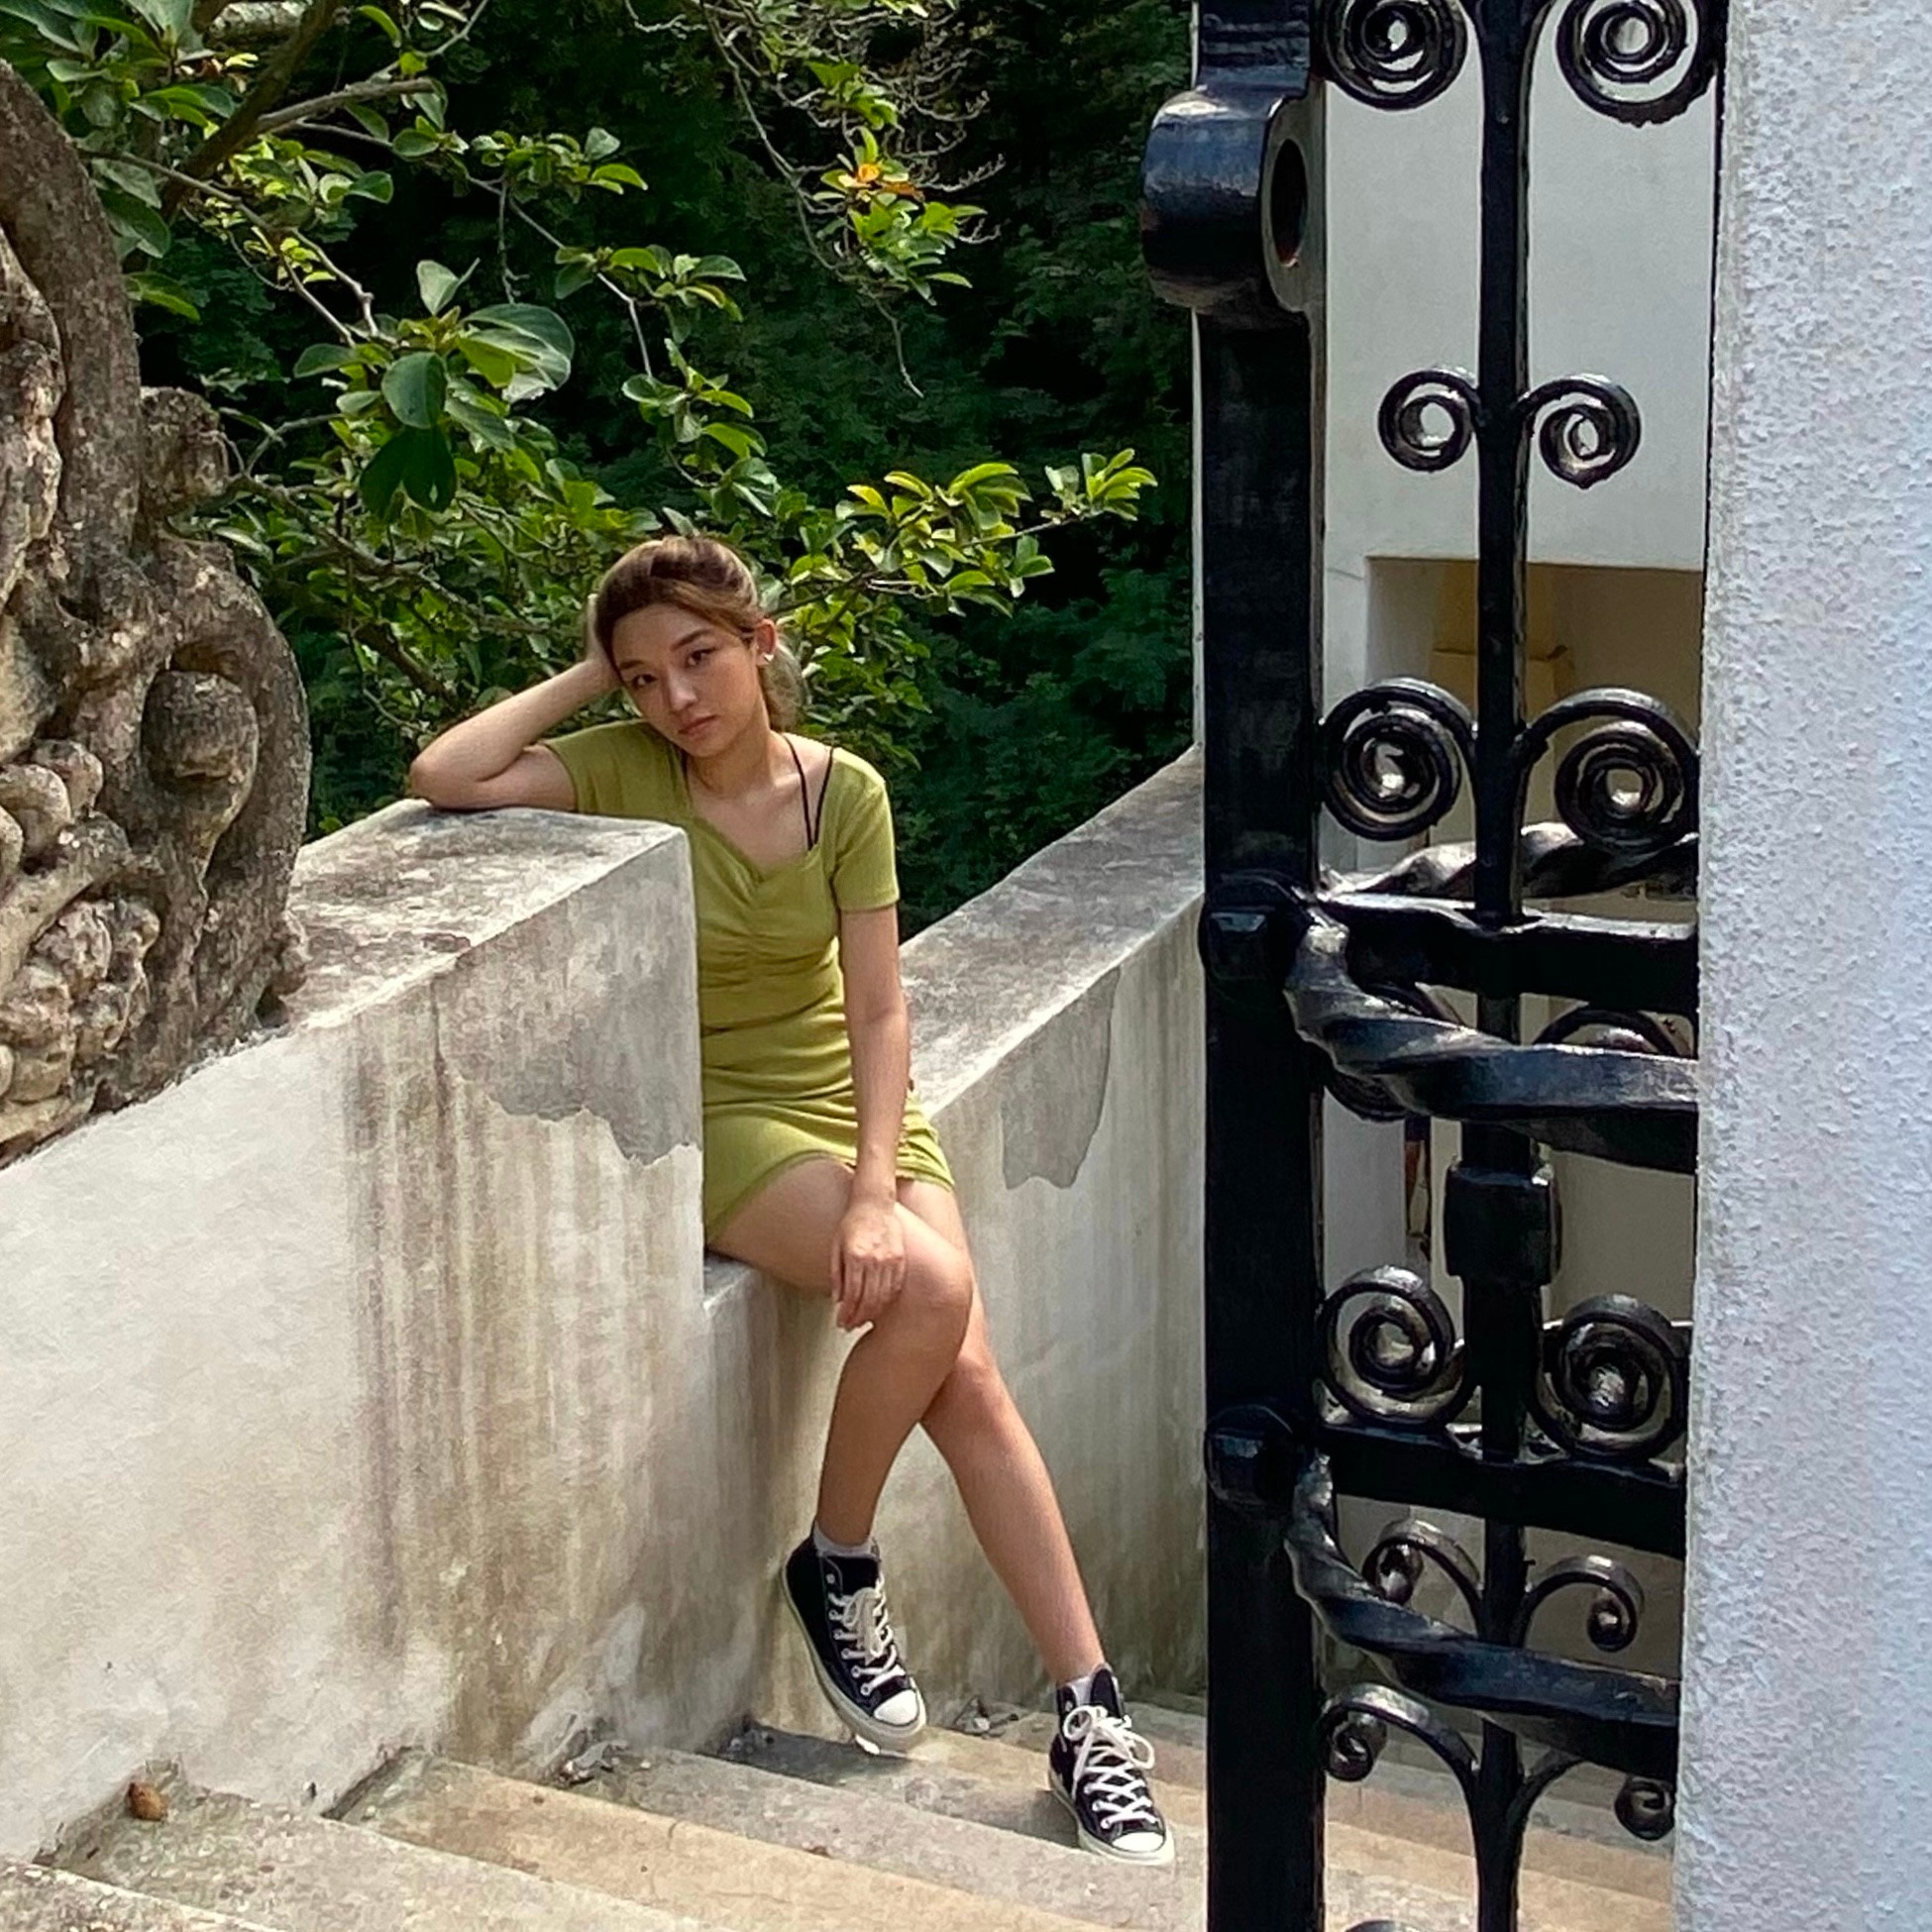 A young Chinese woman wearing a short green dress and black sneakers with white laces sits on a retainer wall that runs along a cement staircase in an outdoor garden setting. 